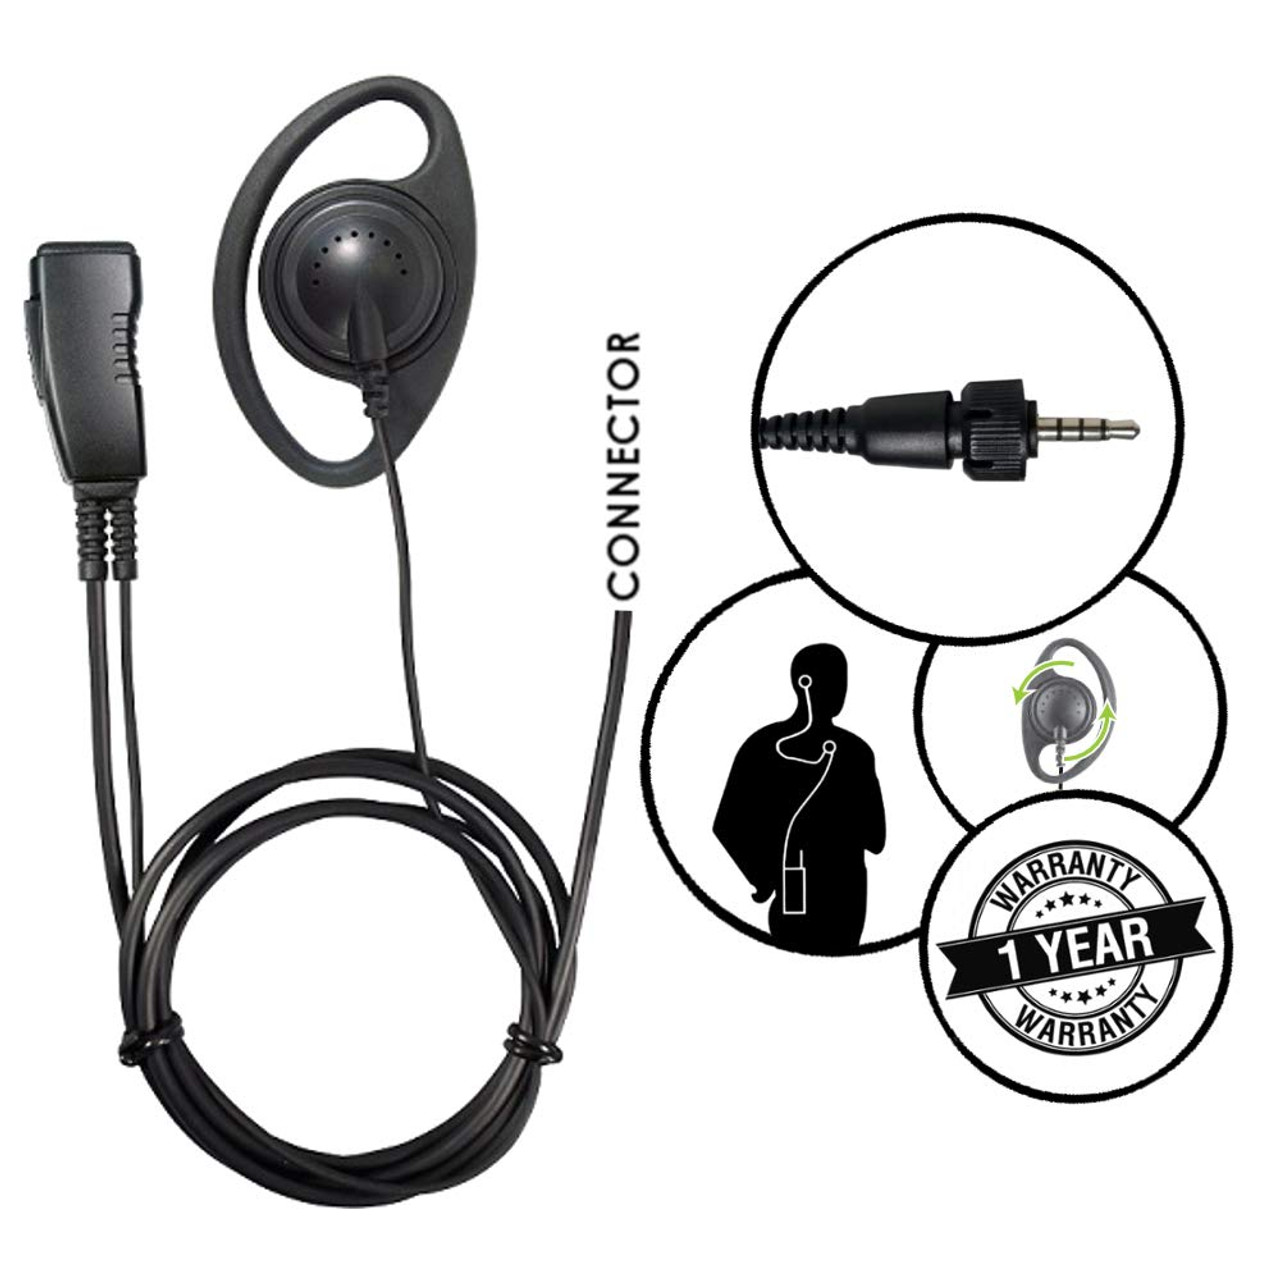 ICOM Two Way Radio Compatible D Ring Headset - DR1W-S3A